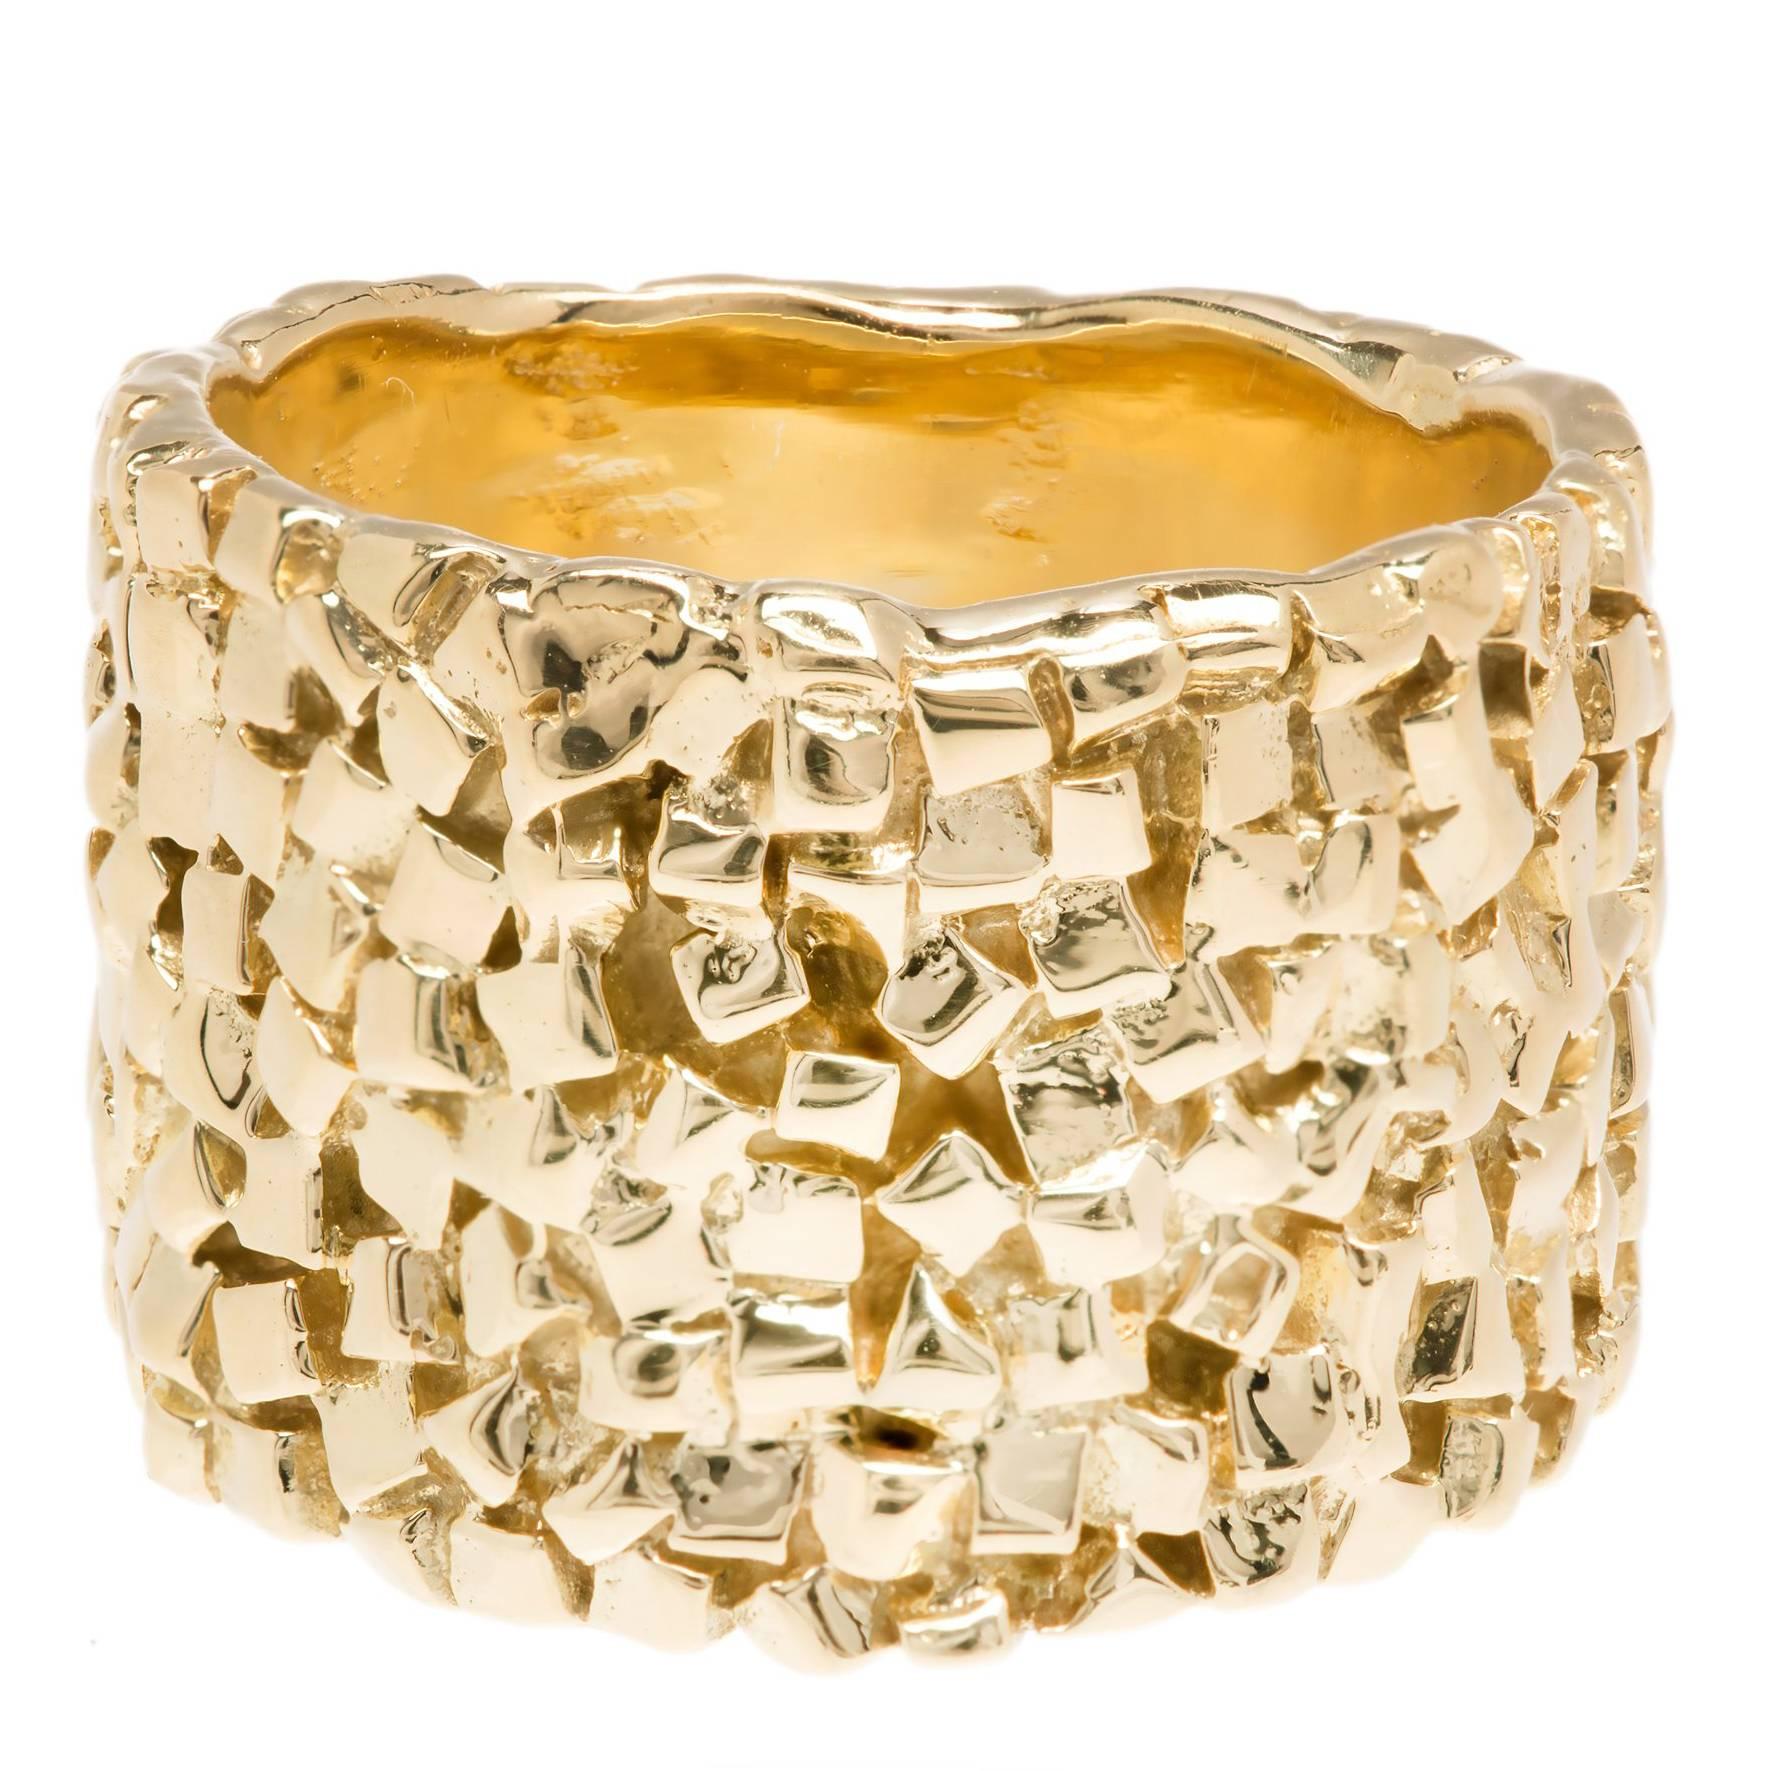 Woven Yellow Gold Band Ring